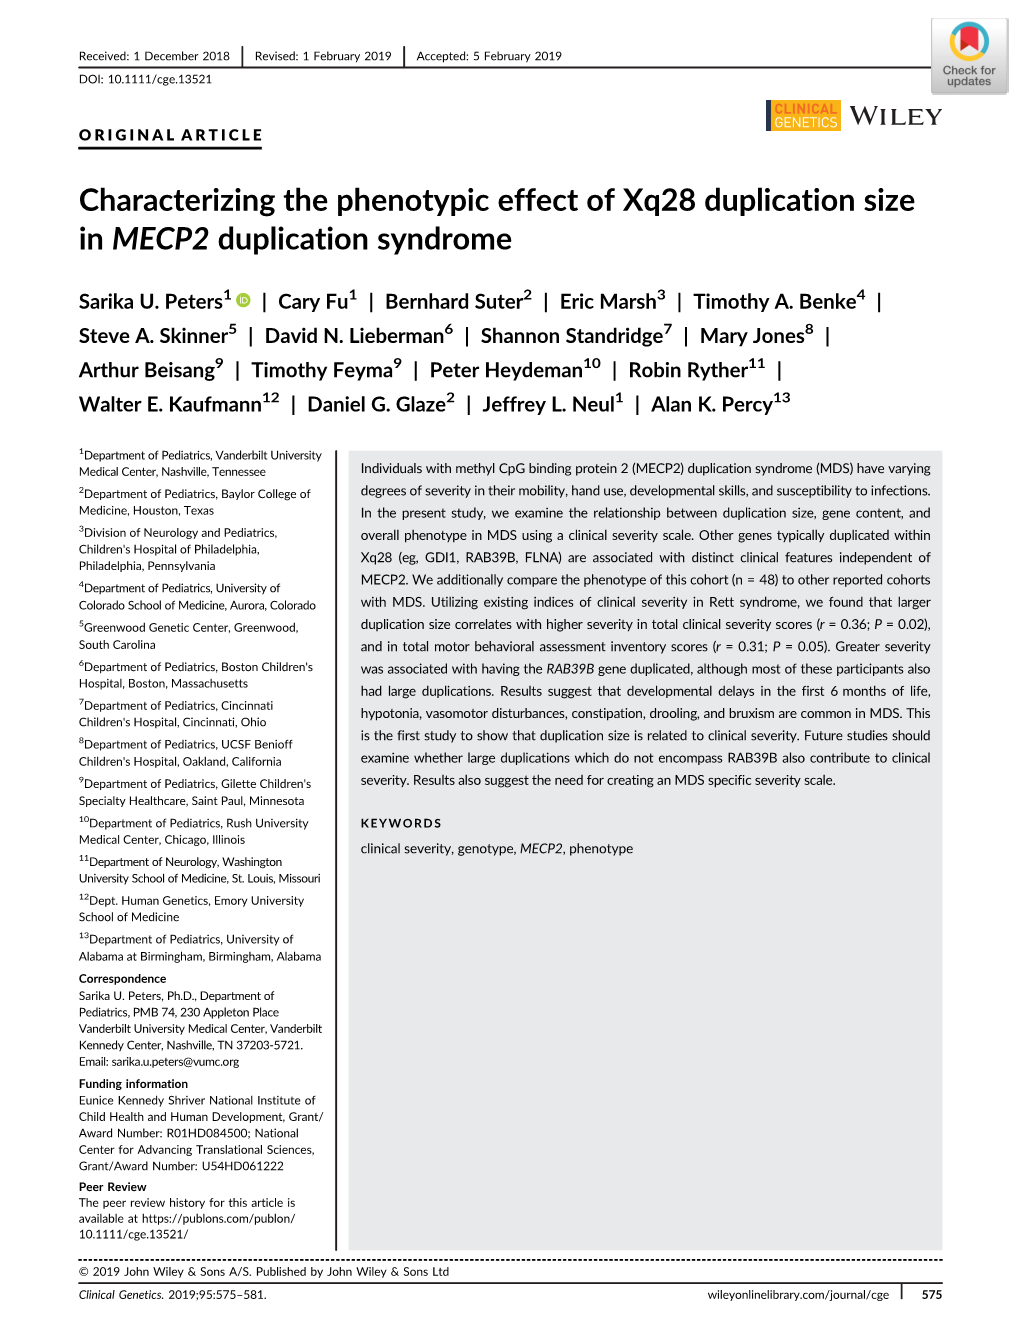 Characterizing the Phenotypic Effect of Xq28 Duplication Size in MECP2 Duplication Syndrome